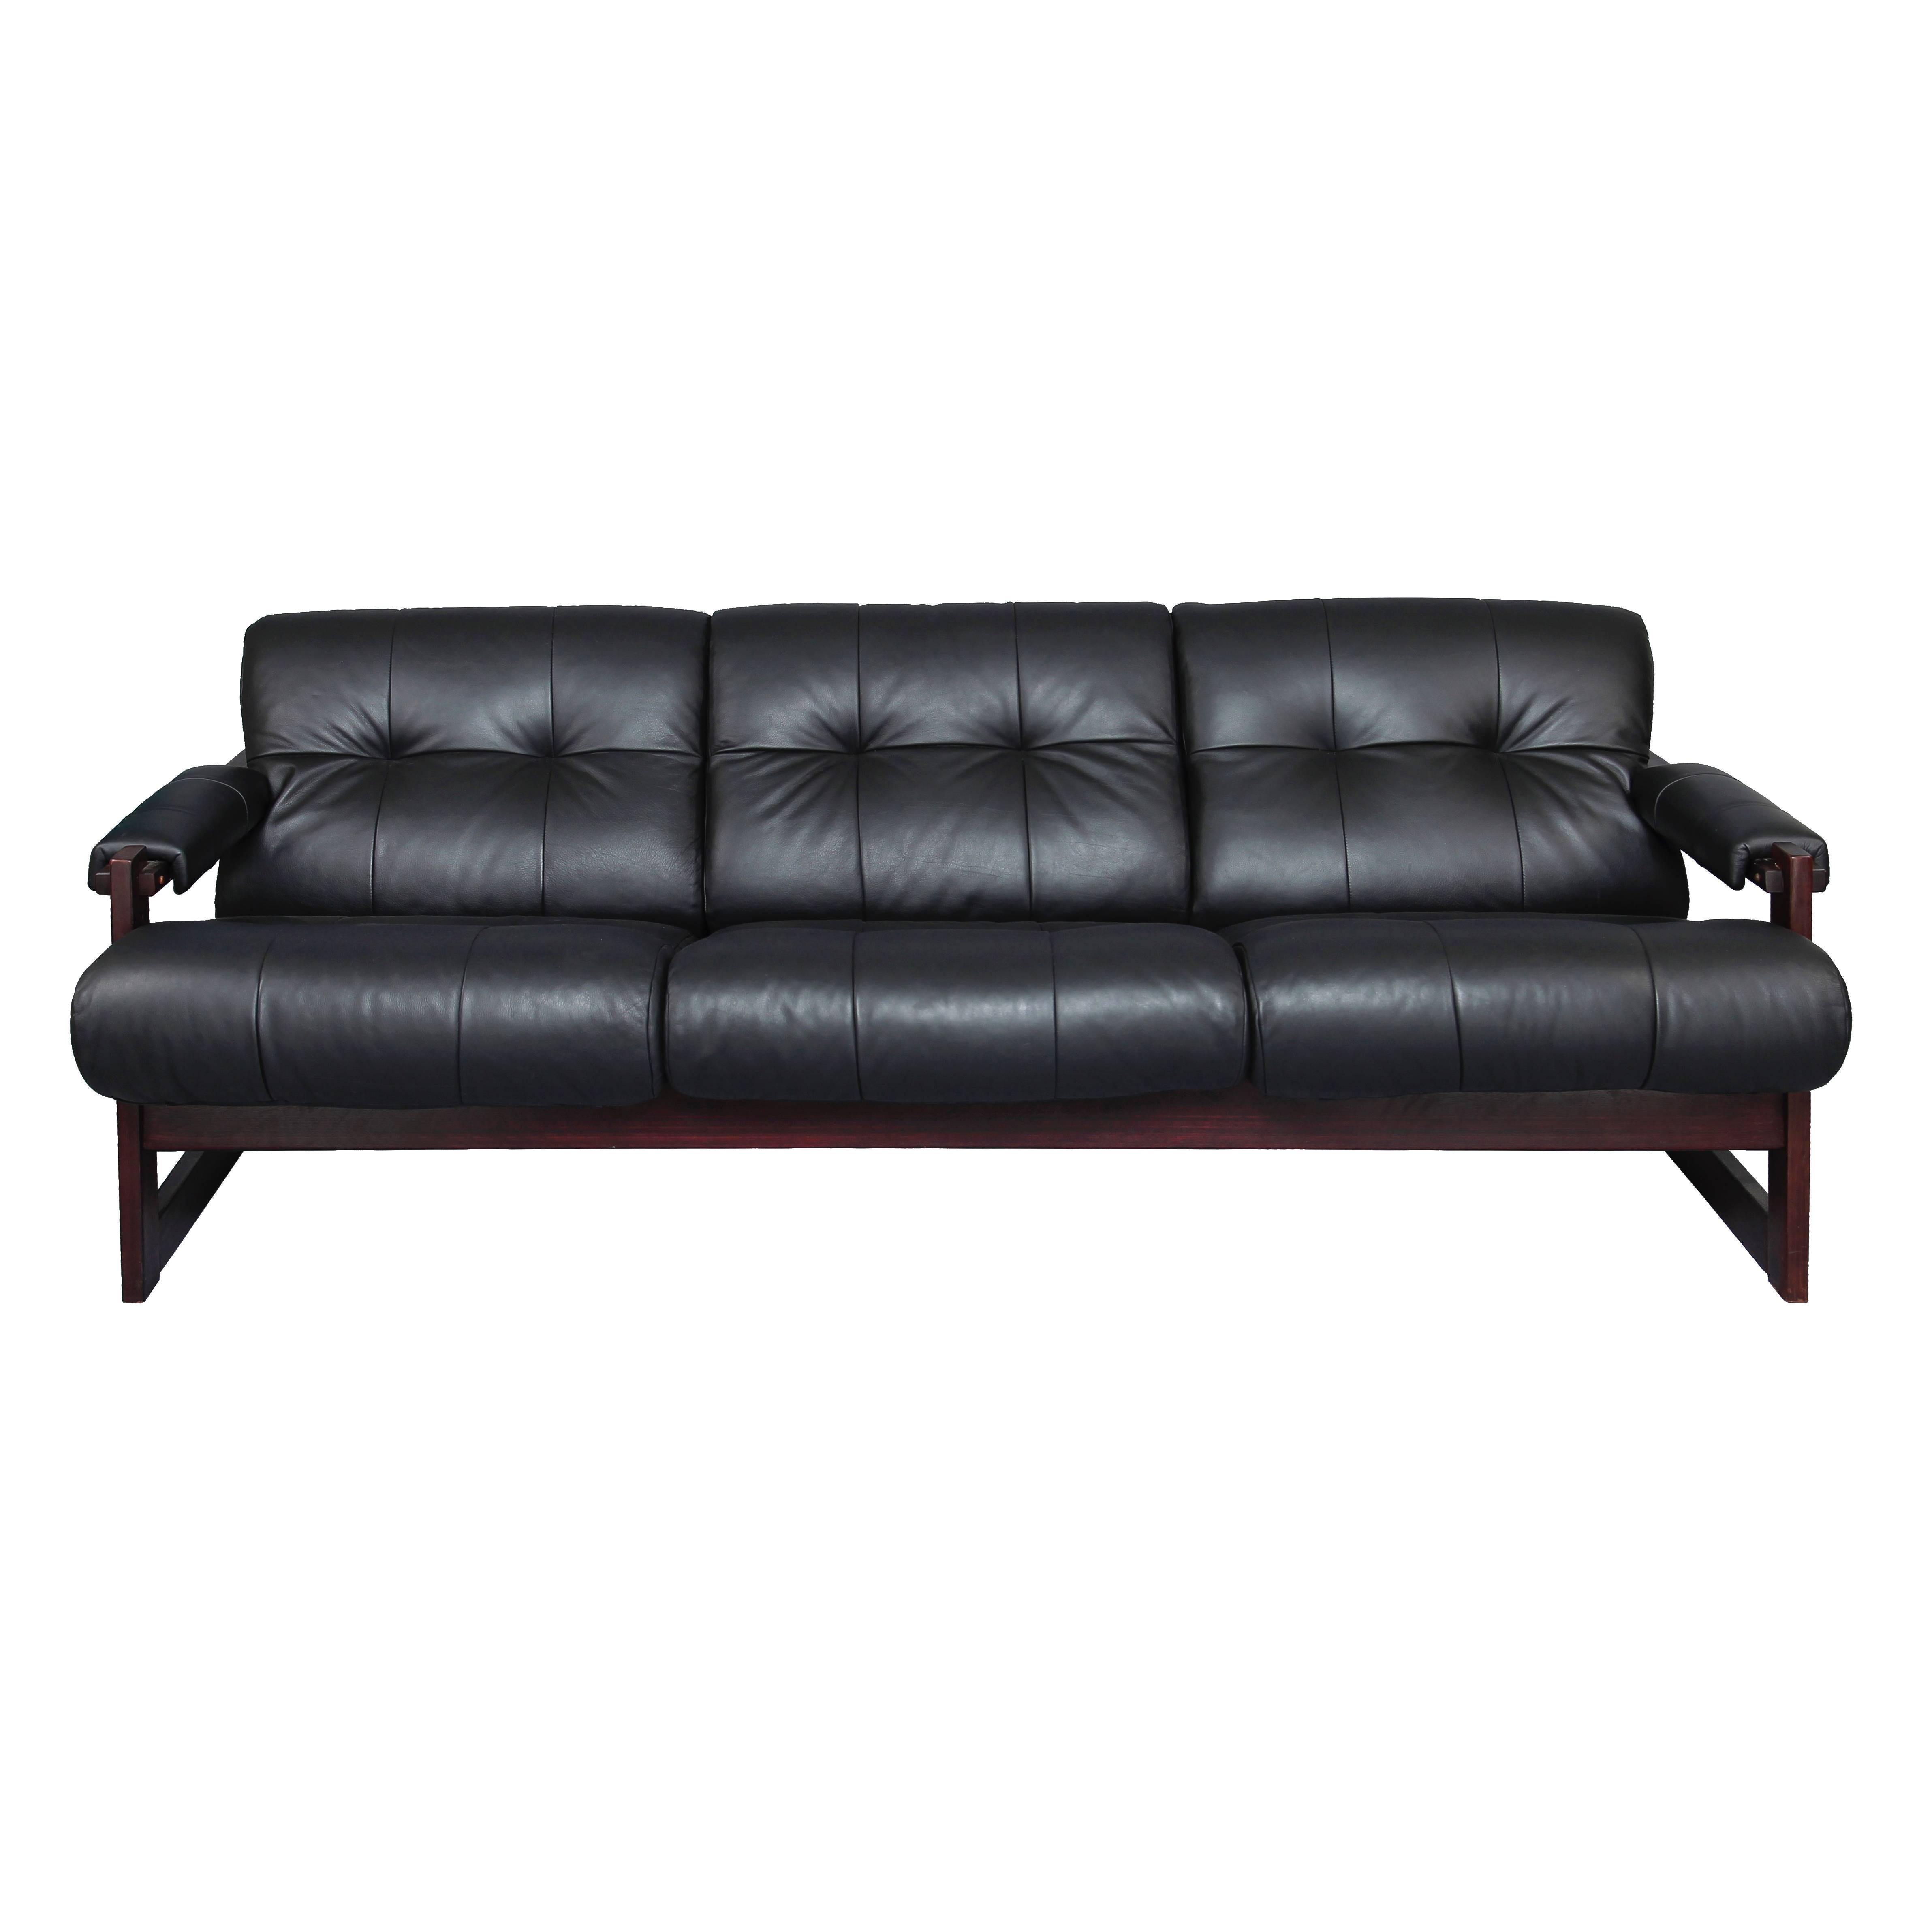 1960s tufted leather sofa with Jatoba Wood Frame by Percival Lafer. This Model MP-167 was produced by Lafer MP in Brazil.

Percival Lafer is a contemporary Brazilian furniture maker and Pioneer of the Brazilian Modernist movement. He is most